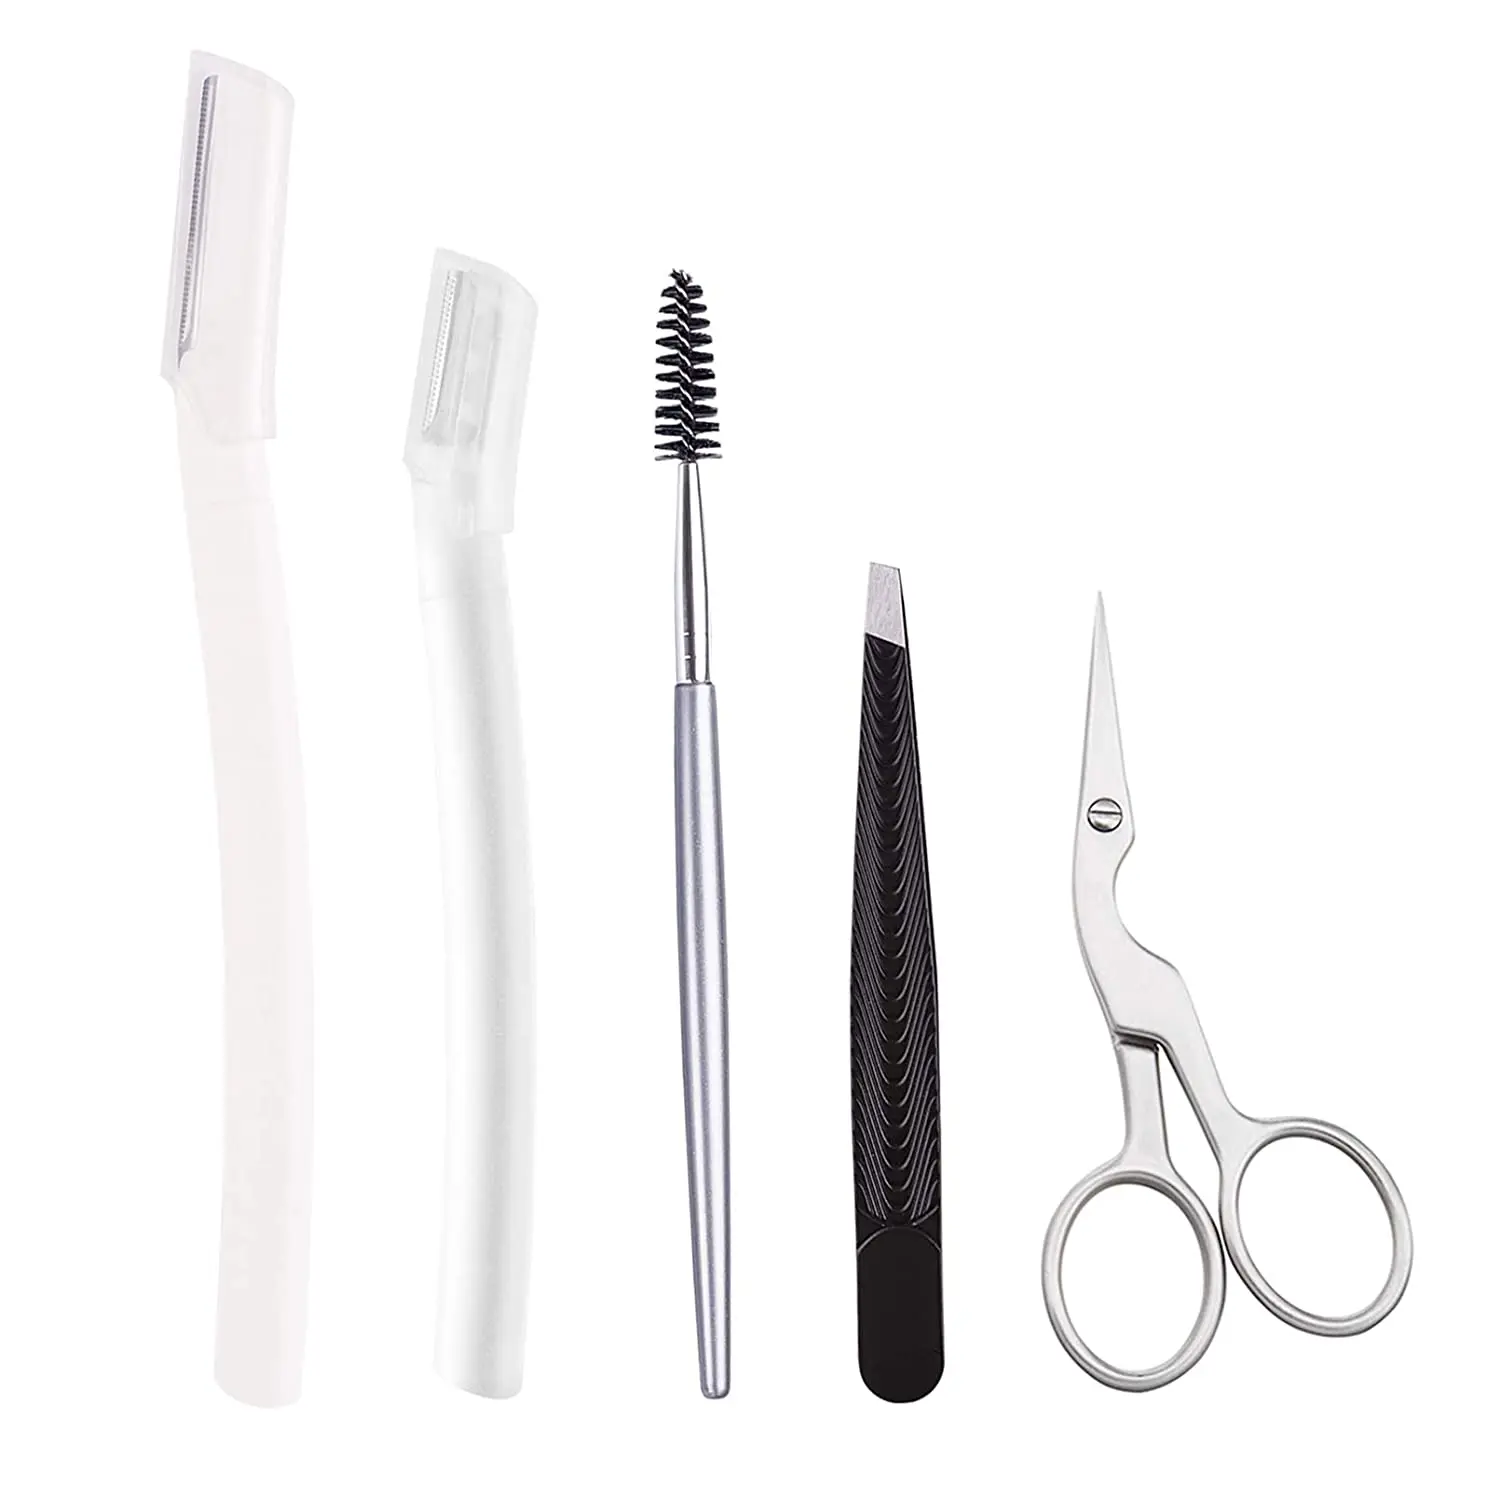 

Professional Slant Tip Curved Brow Shaping Scissors & 2PCS Brow Razors Trimmer & Spoolie Brush, Picture or customized color